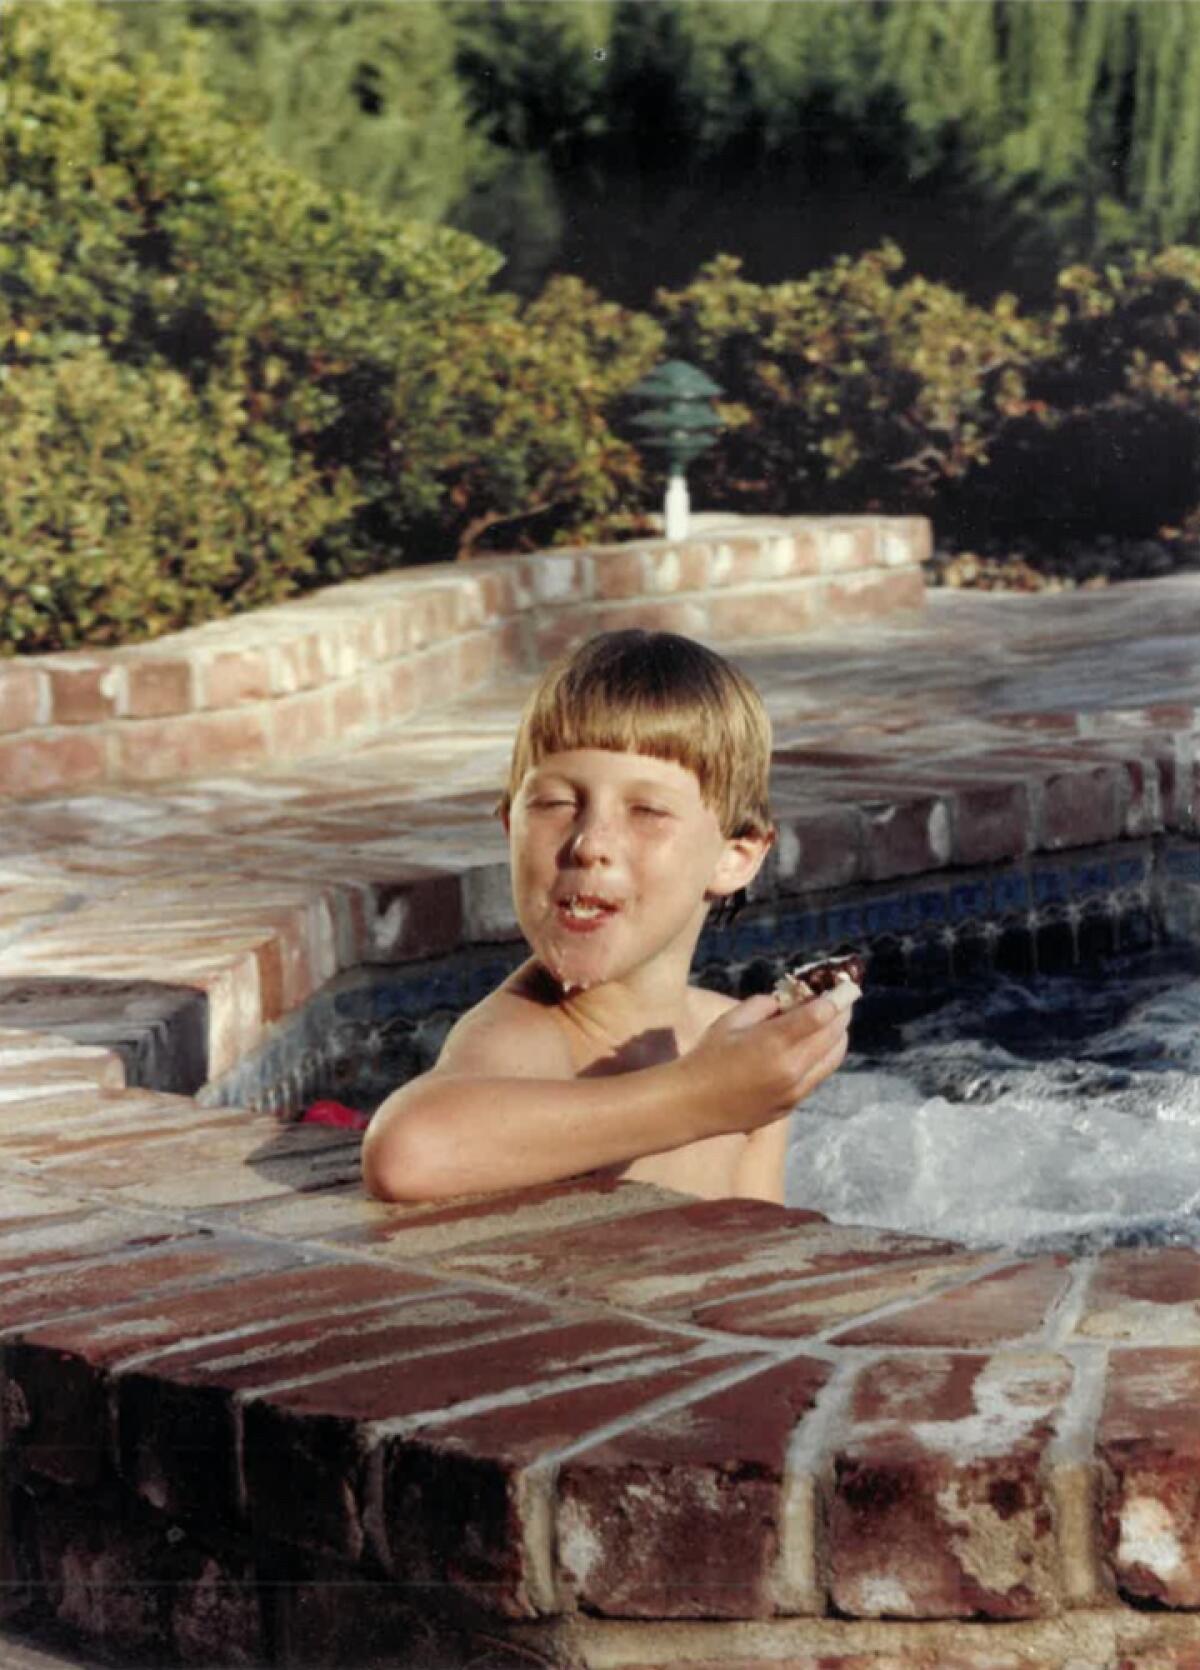 A child makes a silly face while sitting in a pool.